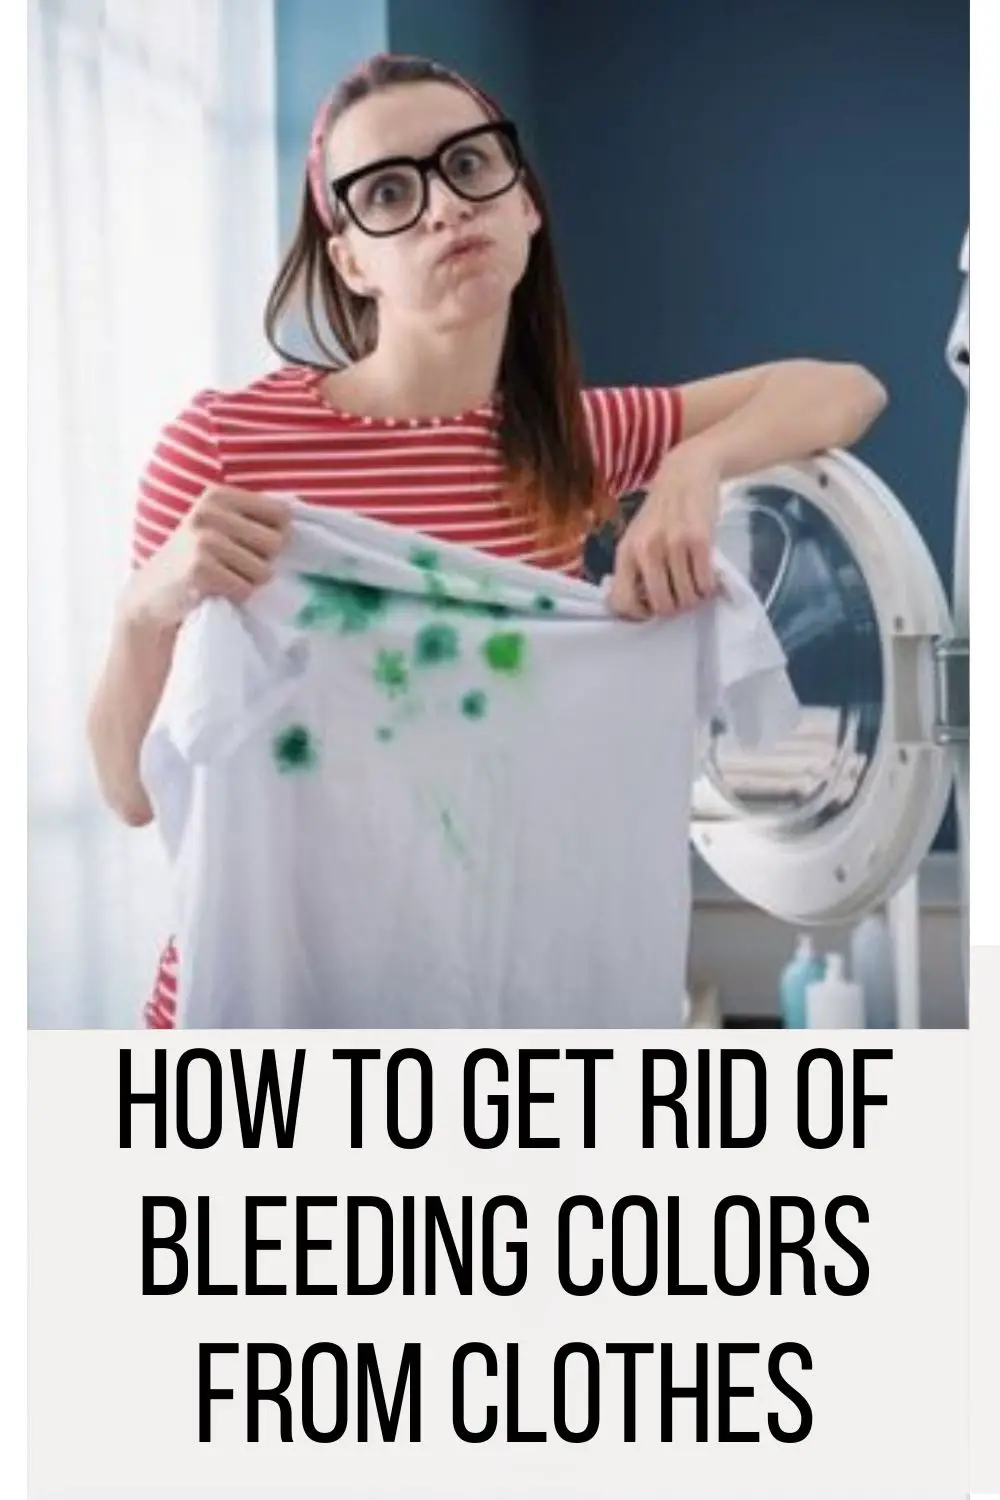 How To Get Rid of Bleeding Colors From Clothes